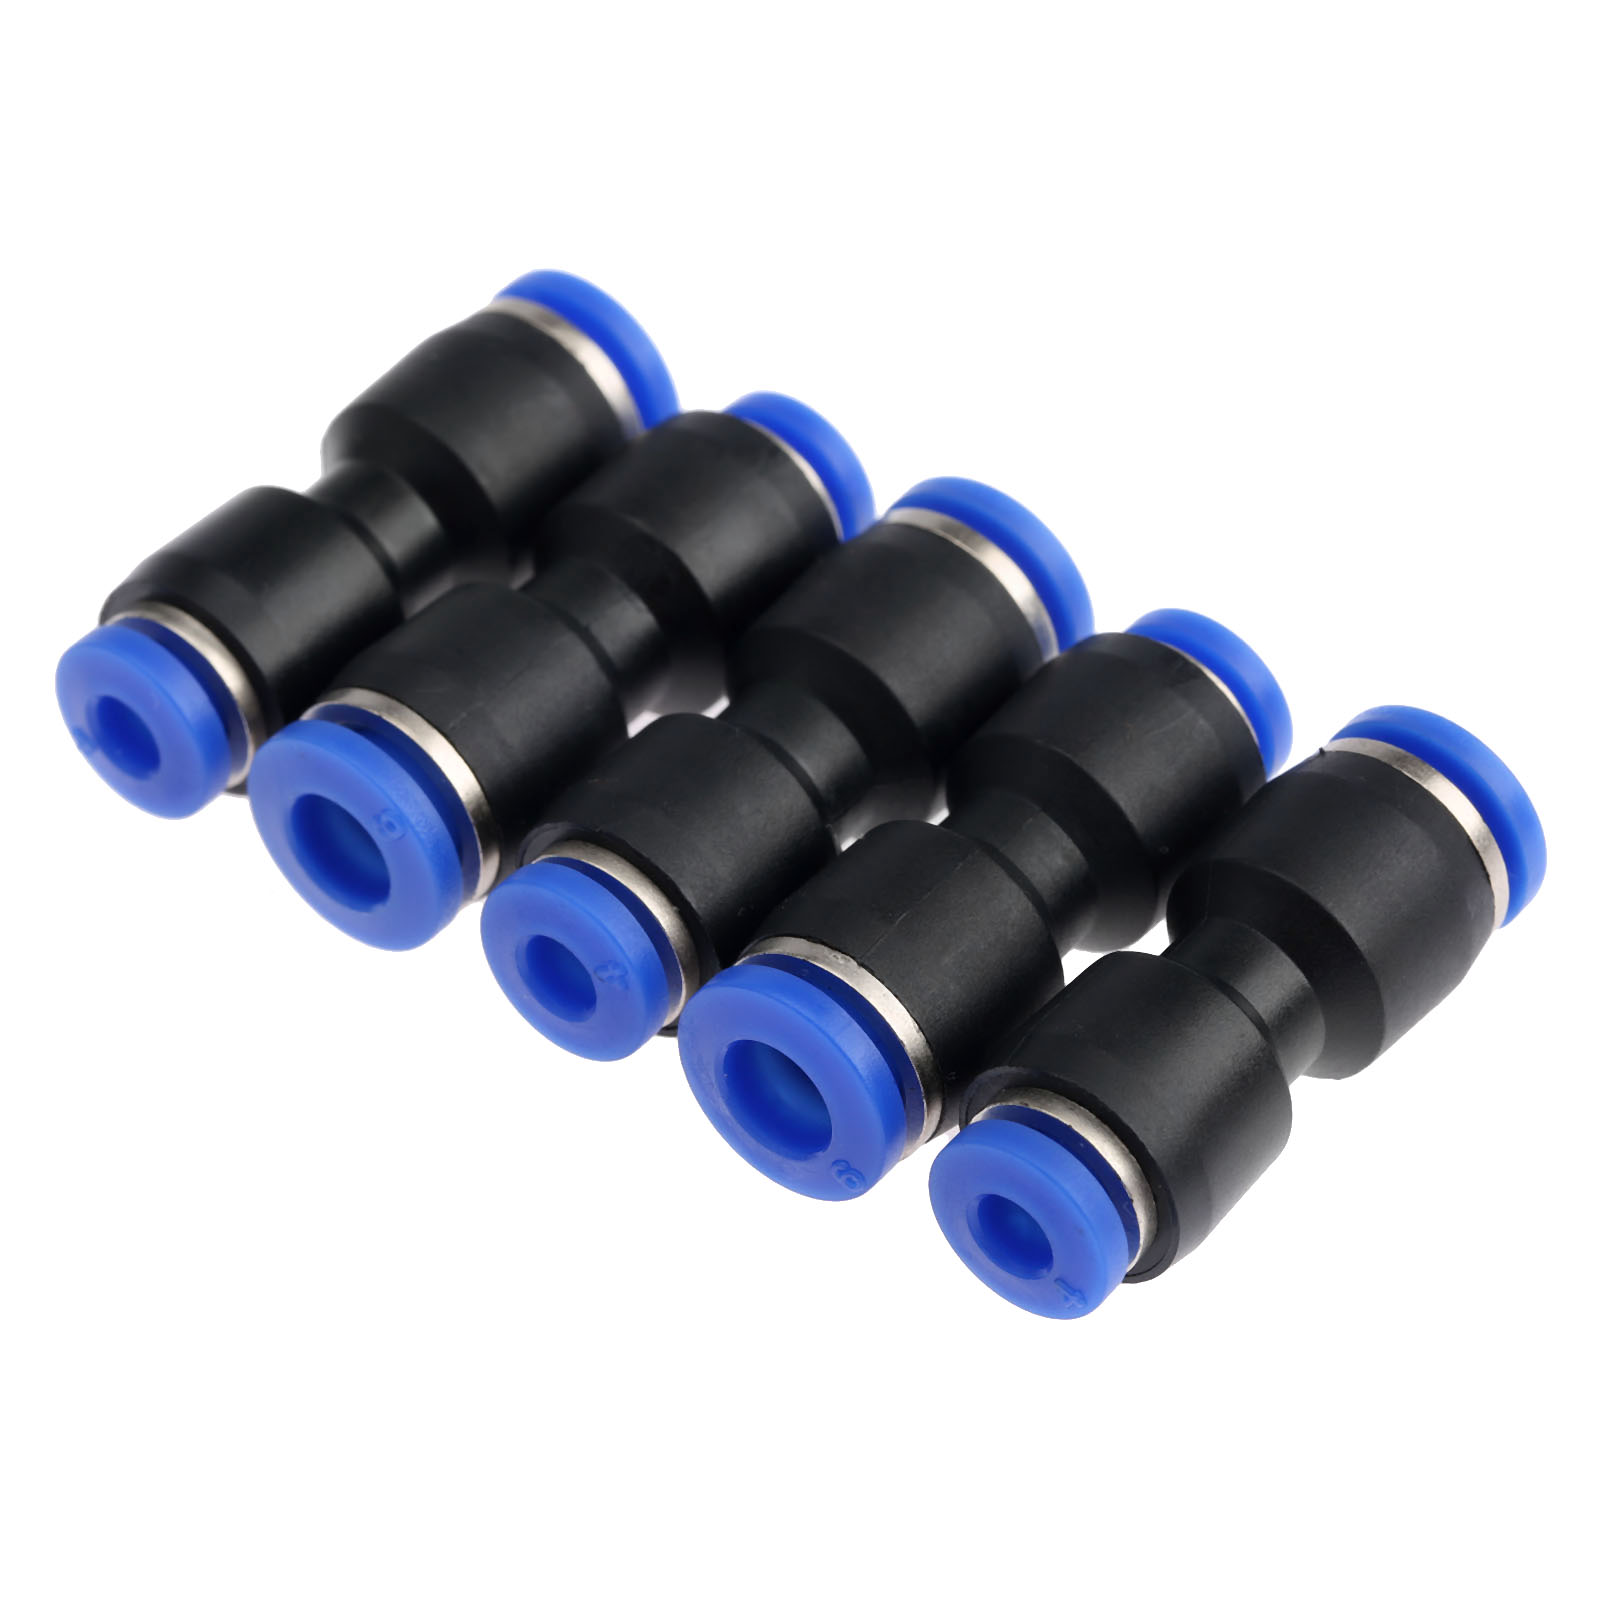 Color: 8mm to 4mm KTS 5Pcs Pneumatic Fittings Push in Straight Reducer Connectors for Air Vacuum Water Hose Plastic Pneumatic Parts 